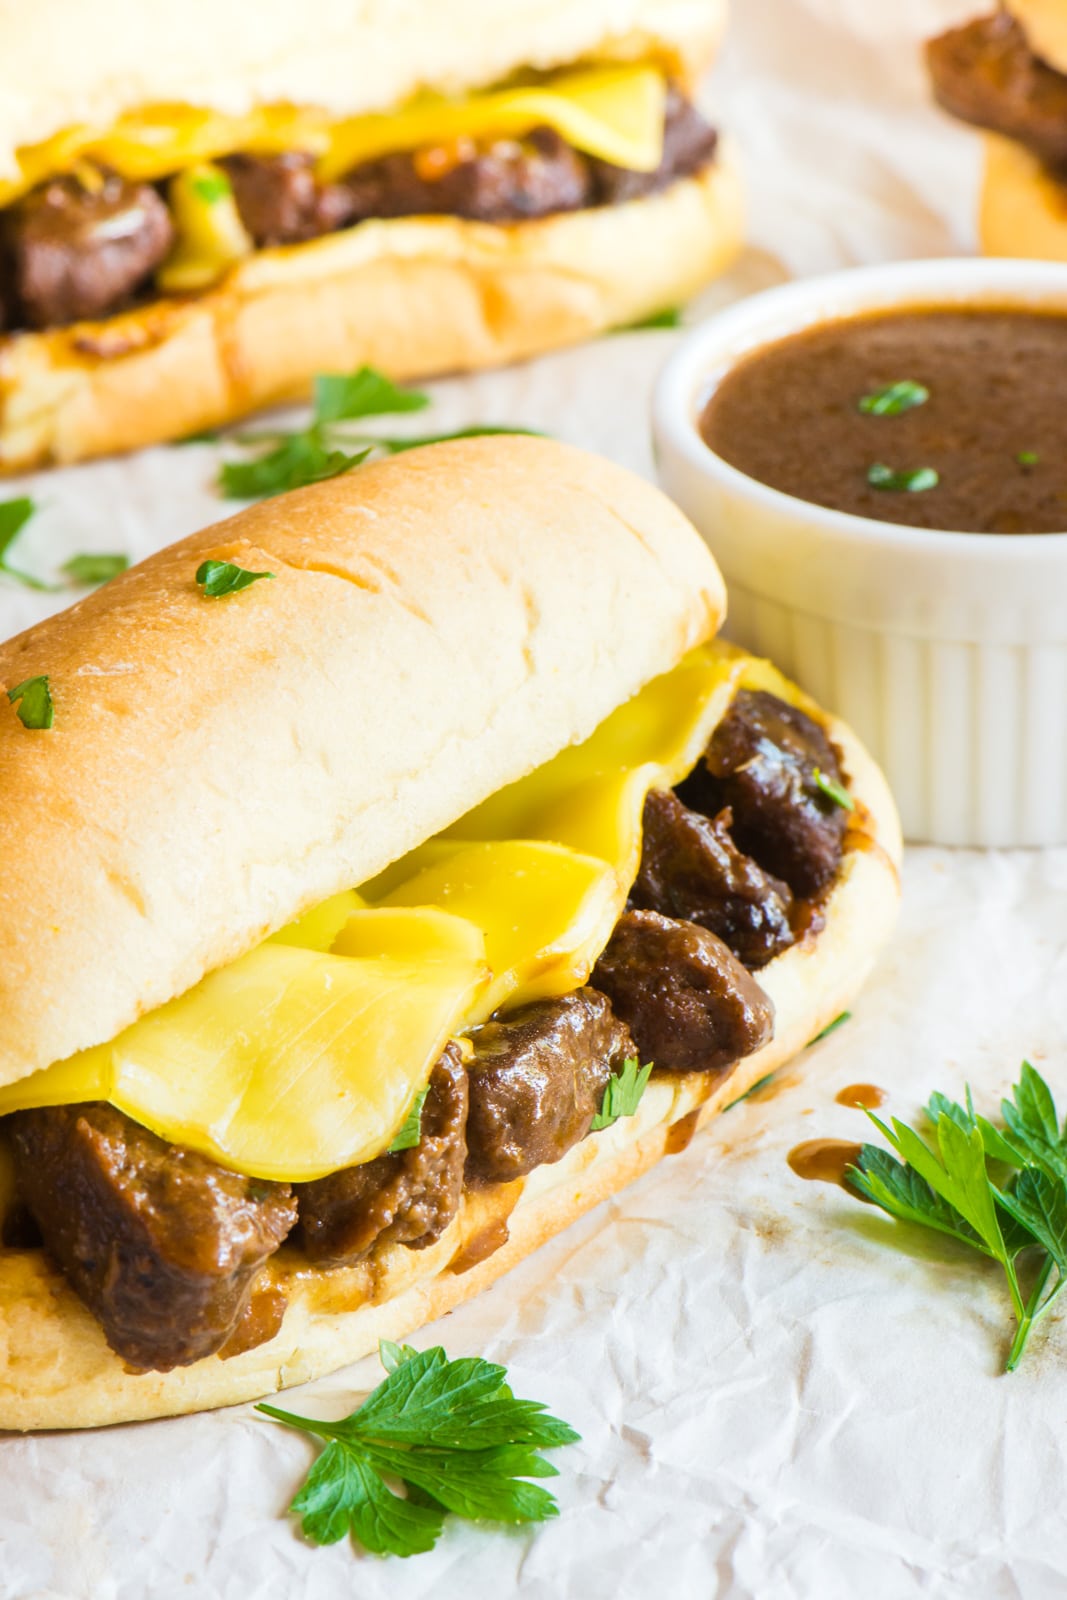 A Vegan French Dip Sandwich with melted cheese. A bowl of sauce and another sandwich is in back.